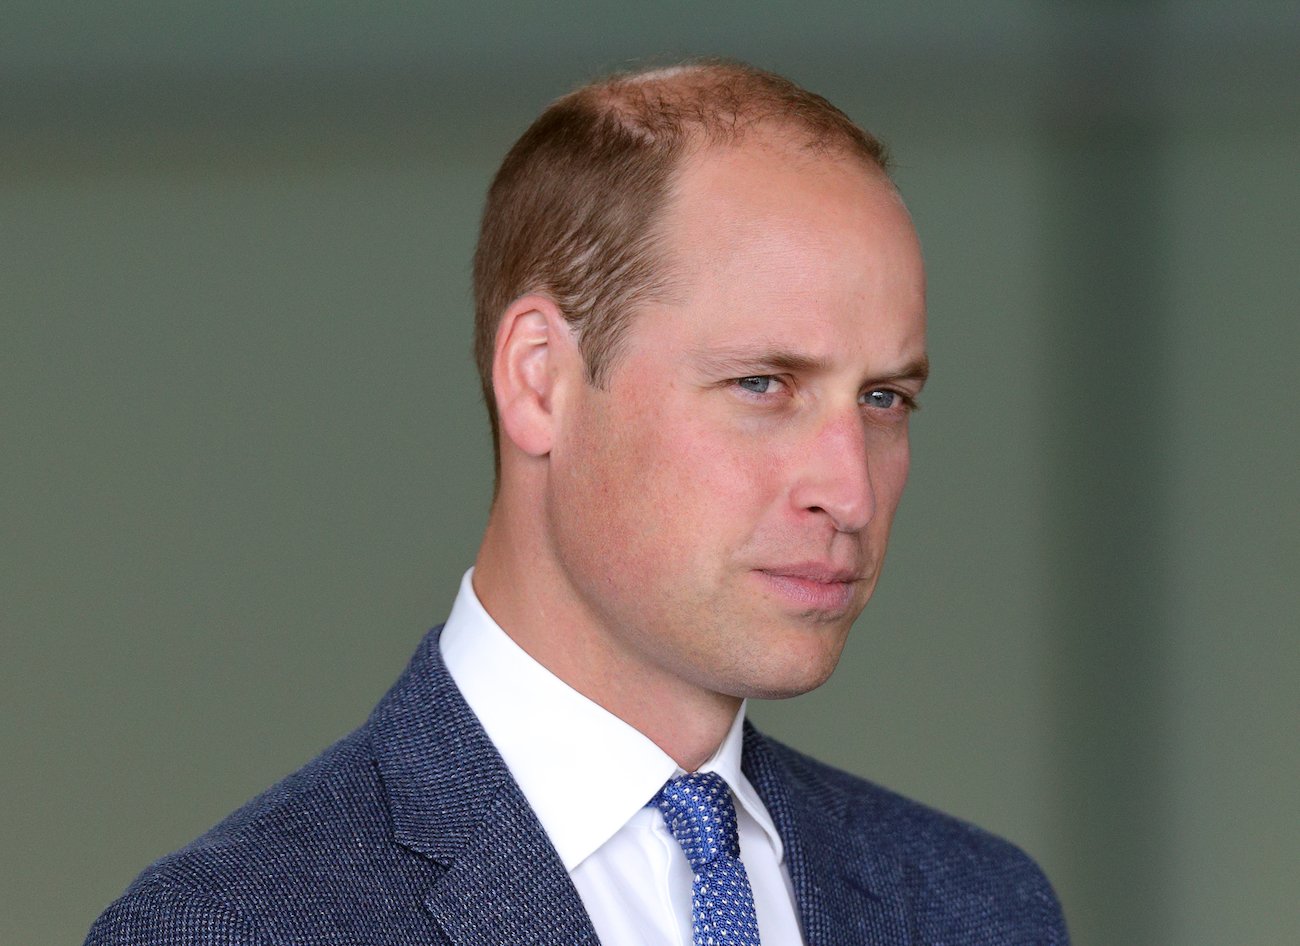 Prince William looking on, wearing a suit